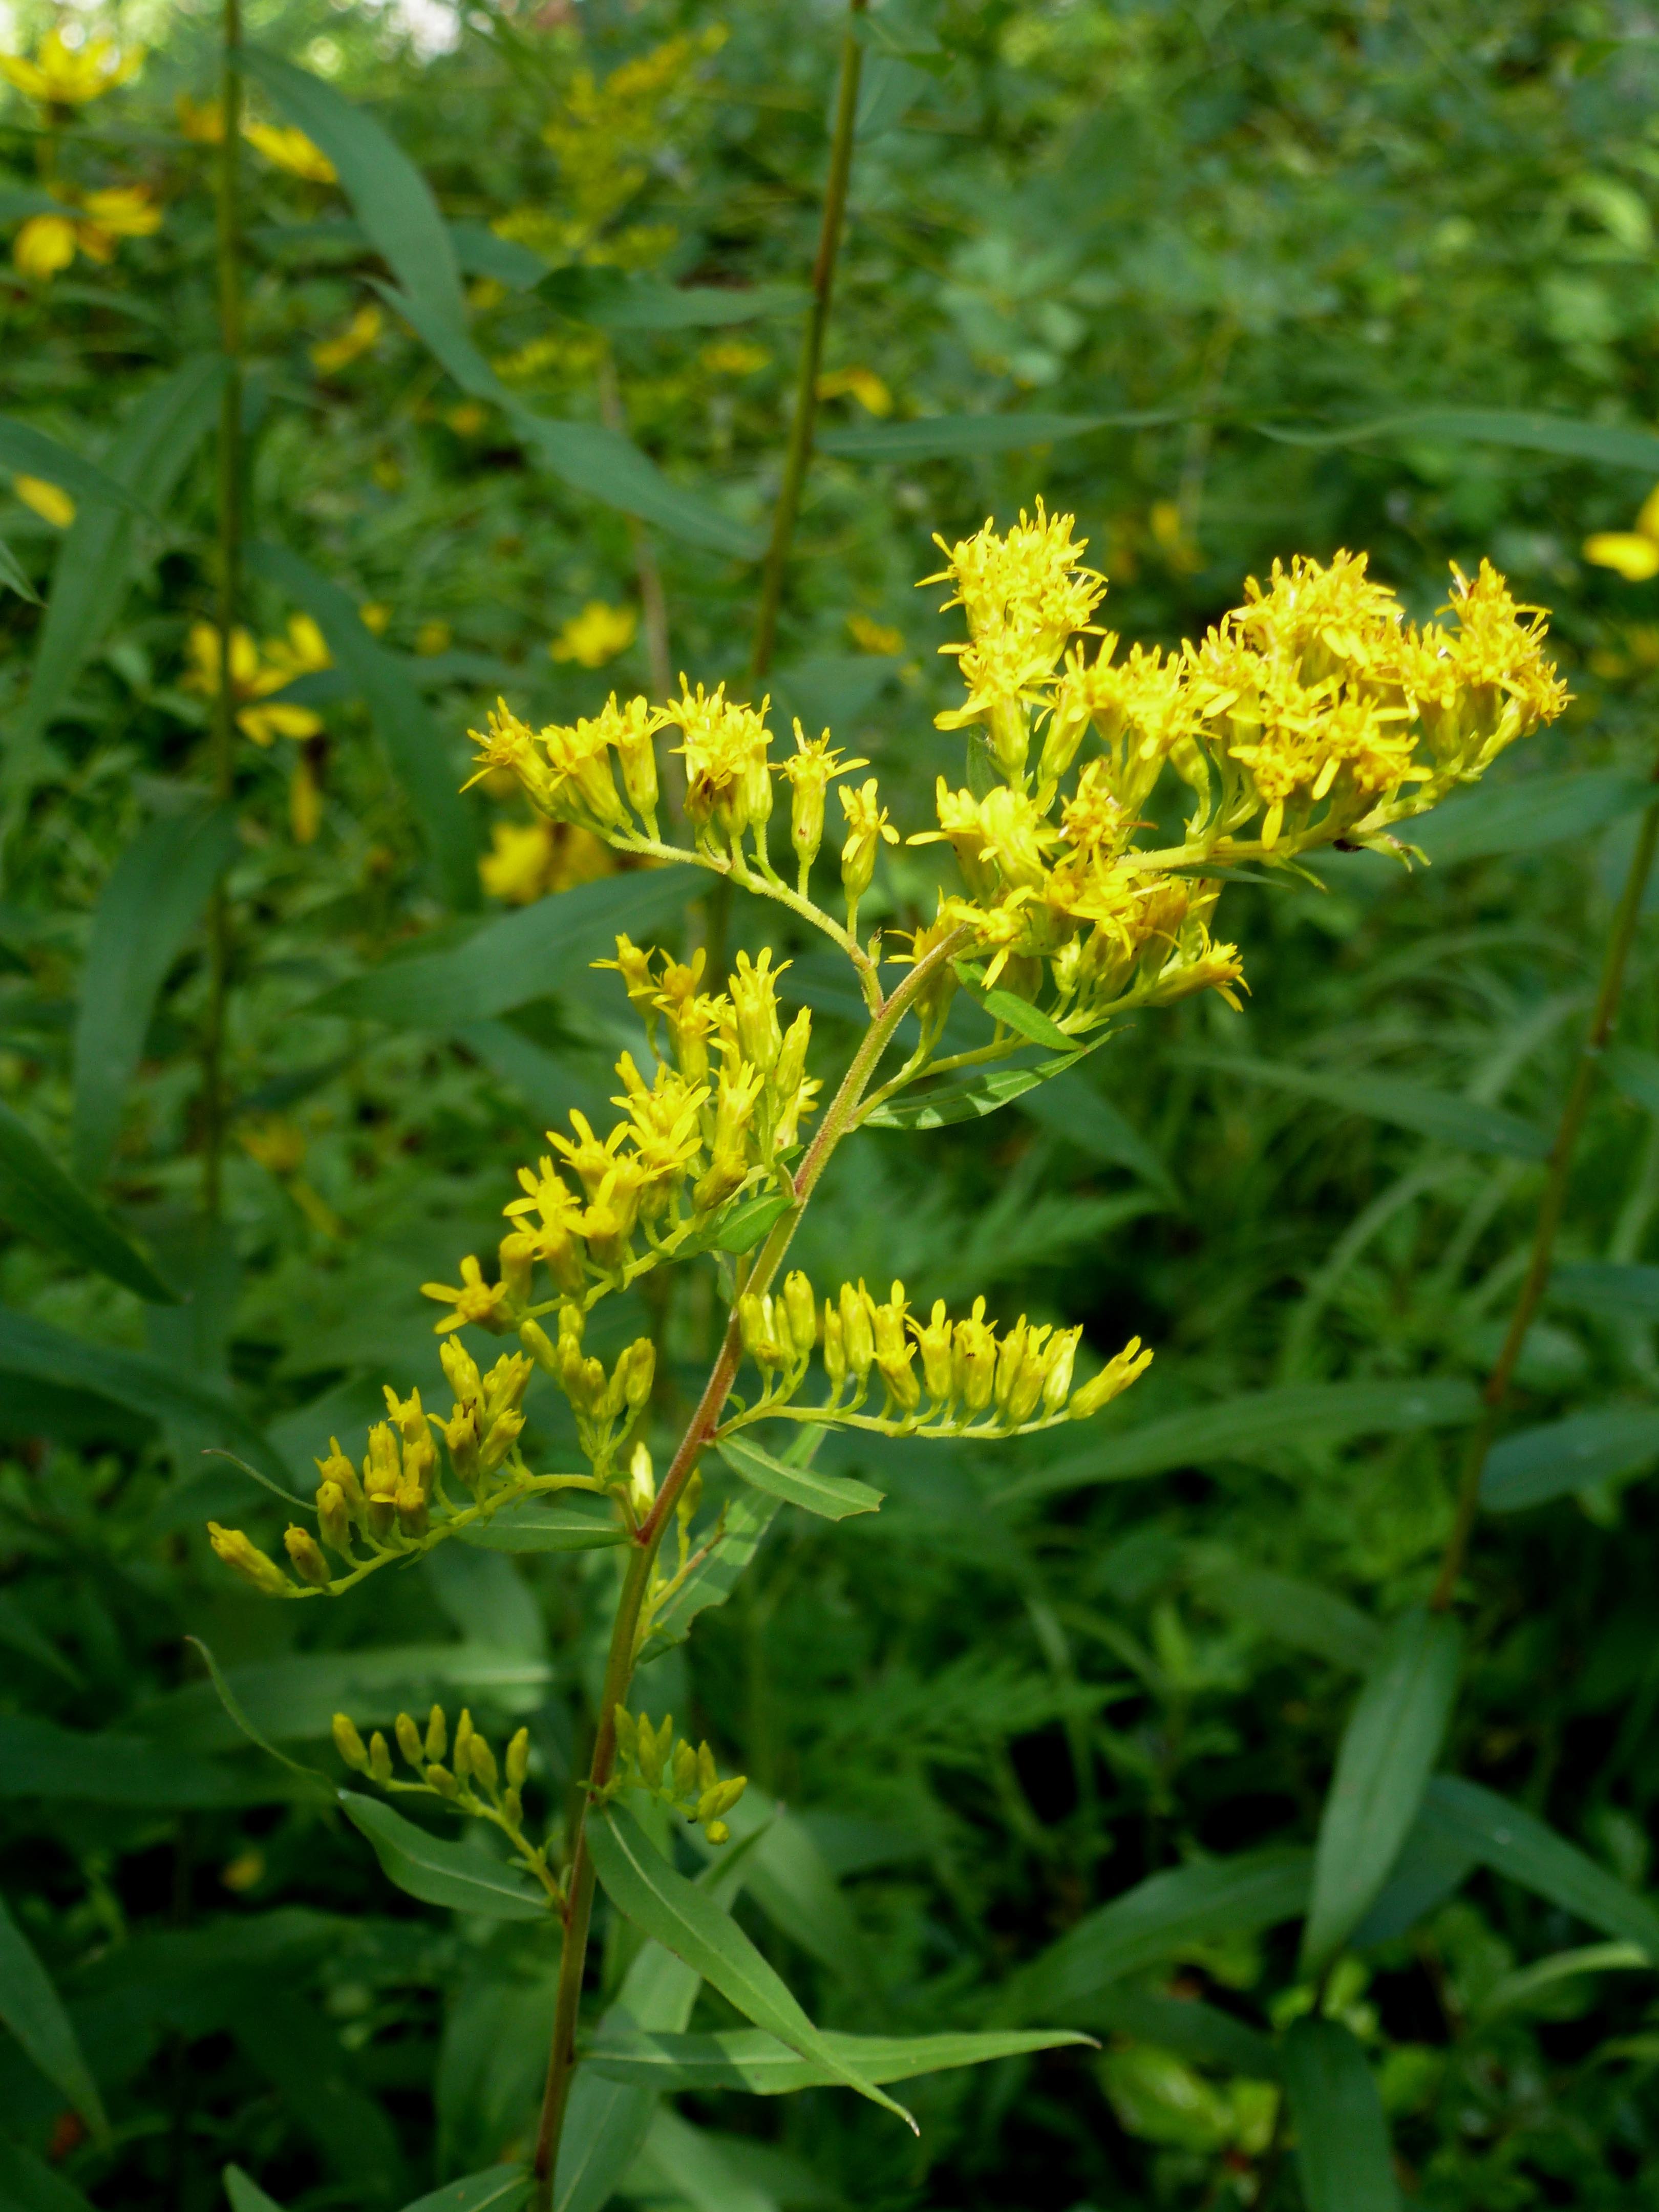 The Scientific Name is Solidago odora. You will likely hear them called Licorice Goldendrod, Anise Goldenrod, Sweet Goldenrod. This picture shows the Terminal inflorescence. of Solidago odora